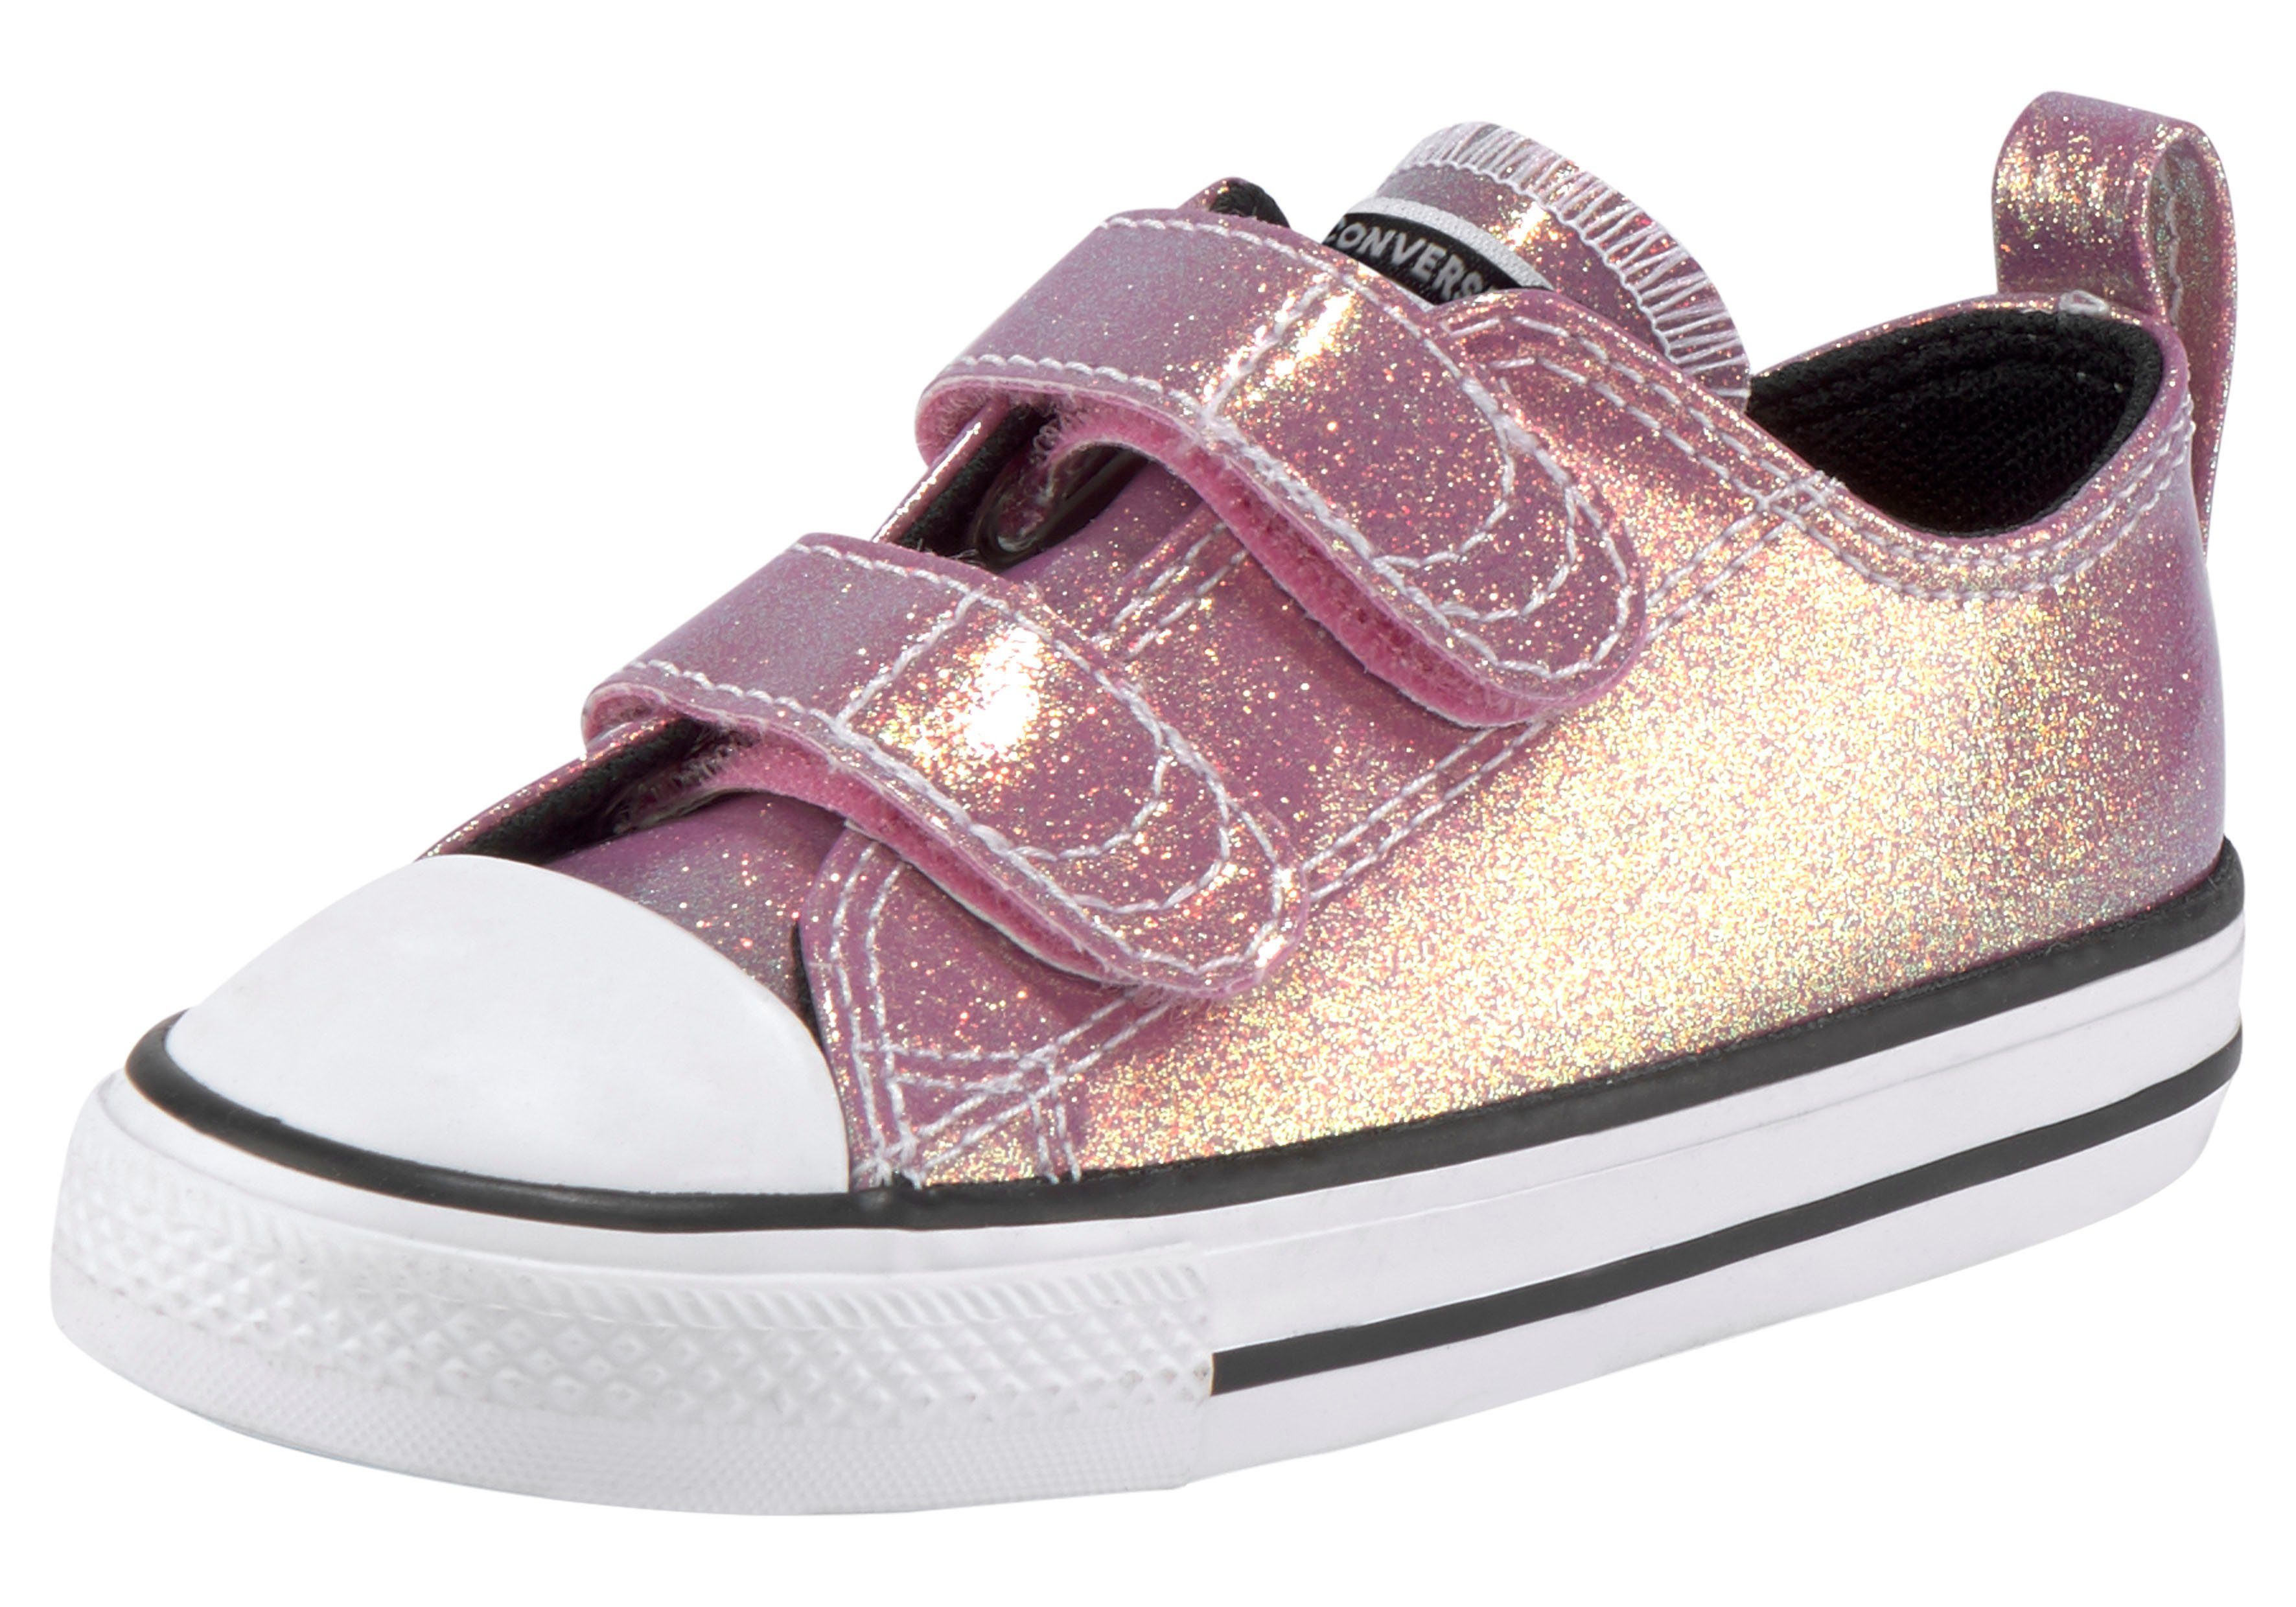 converse chuck taylor all star 2v glitter low top